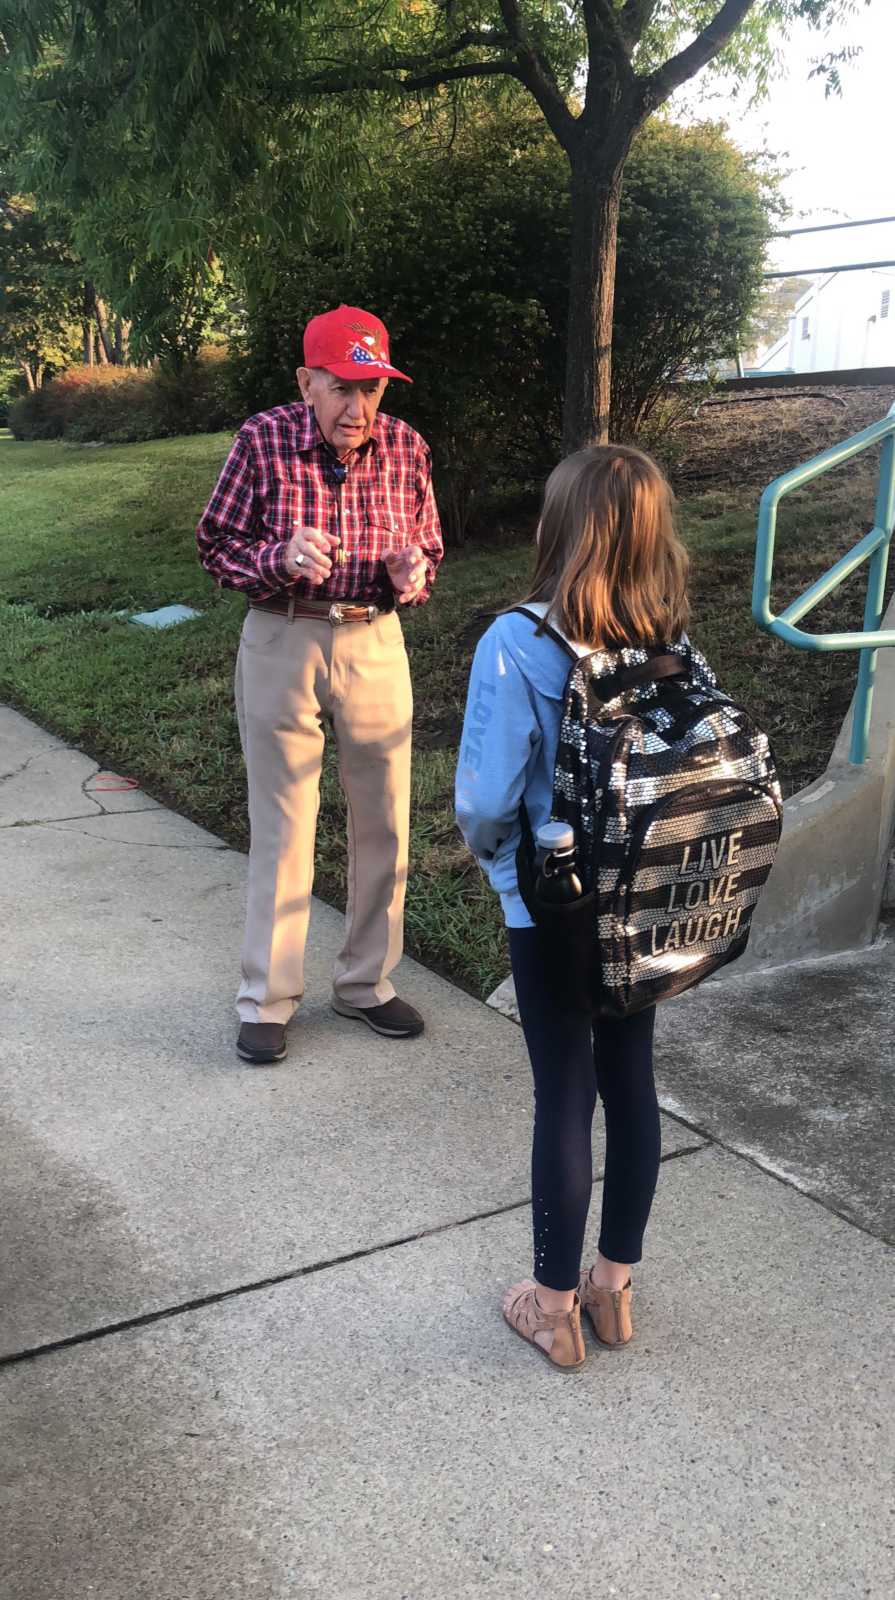 Old man who stands outside middle school to encourage kids stands giving young girl advice